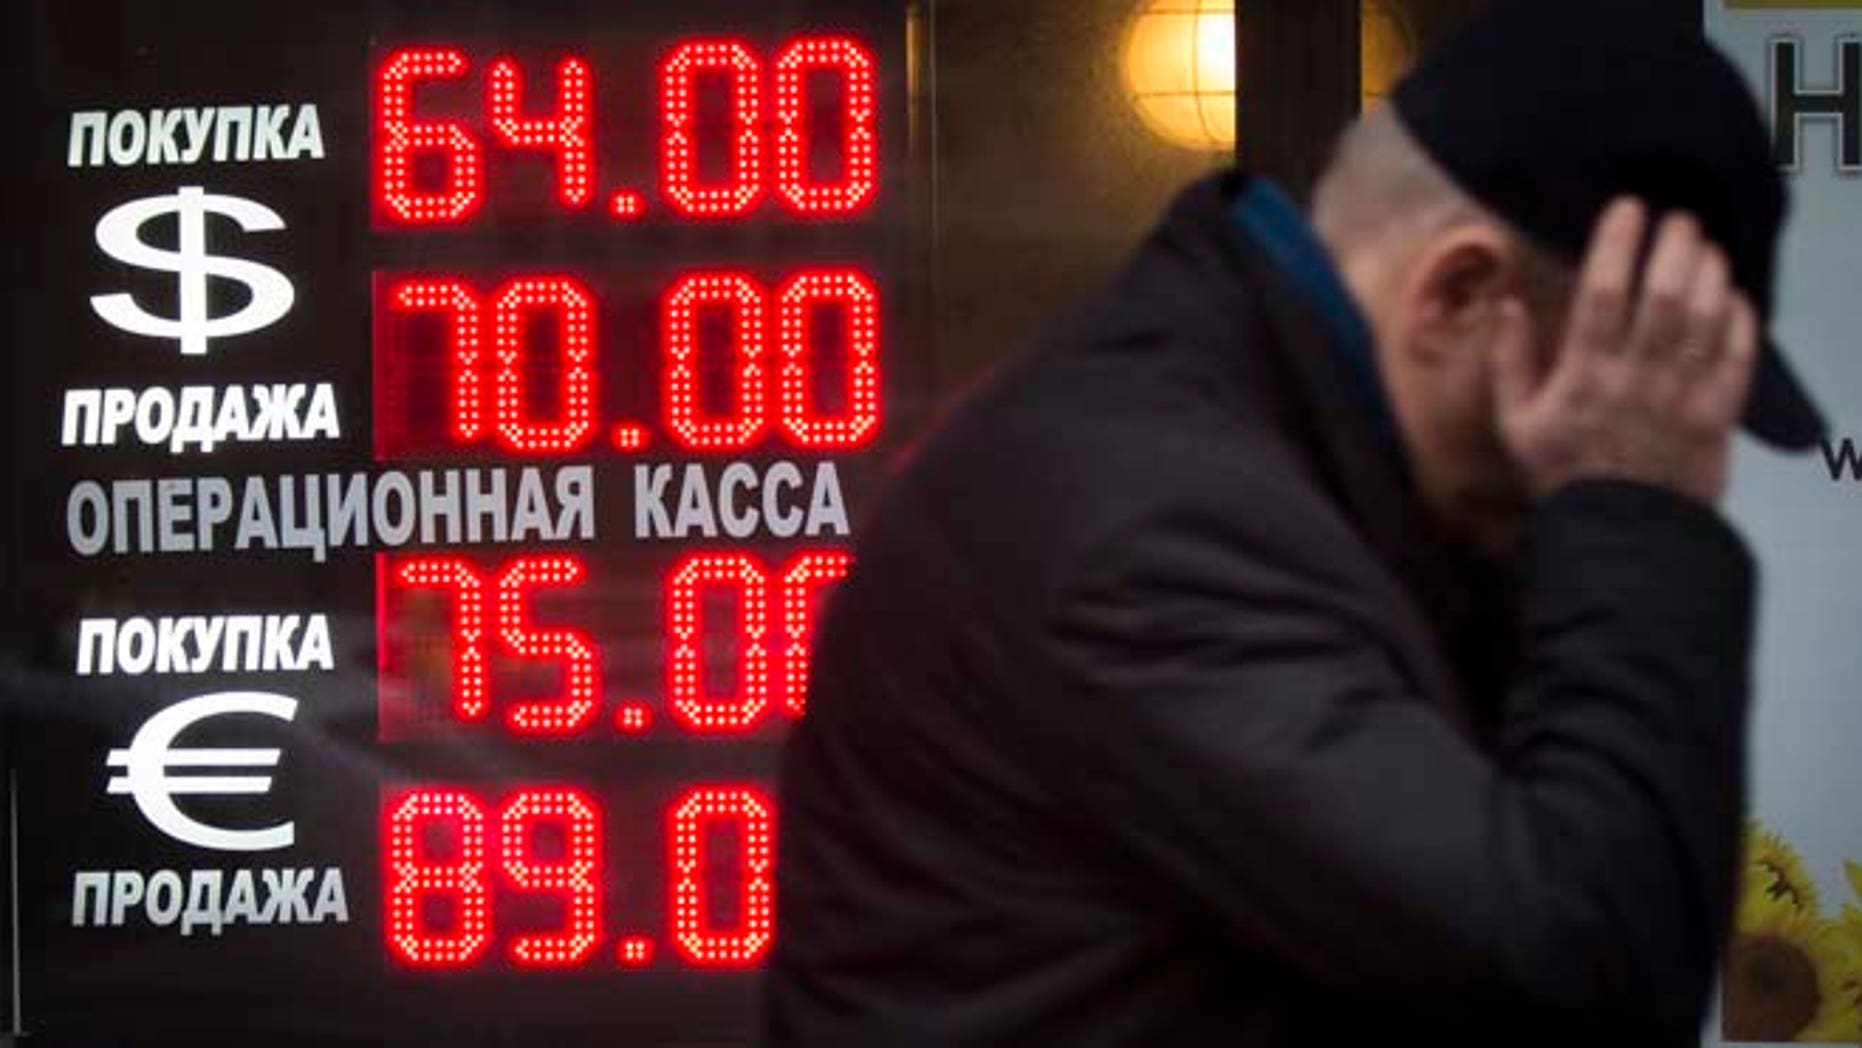 Russian Ruble Falls To Historic Lows While Pressure Increases On Putin